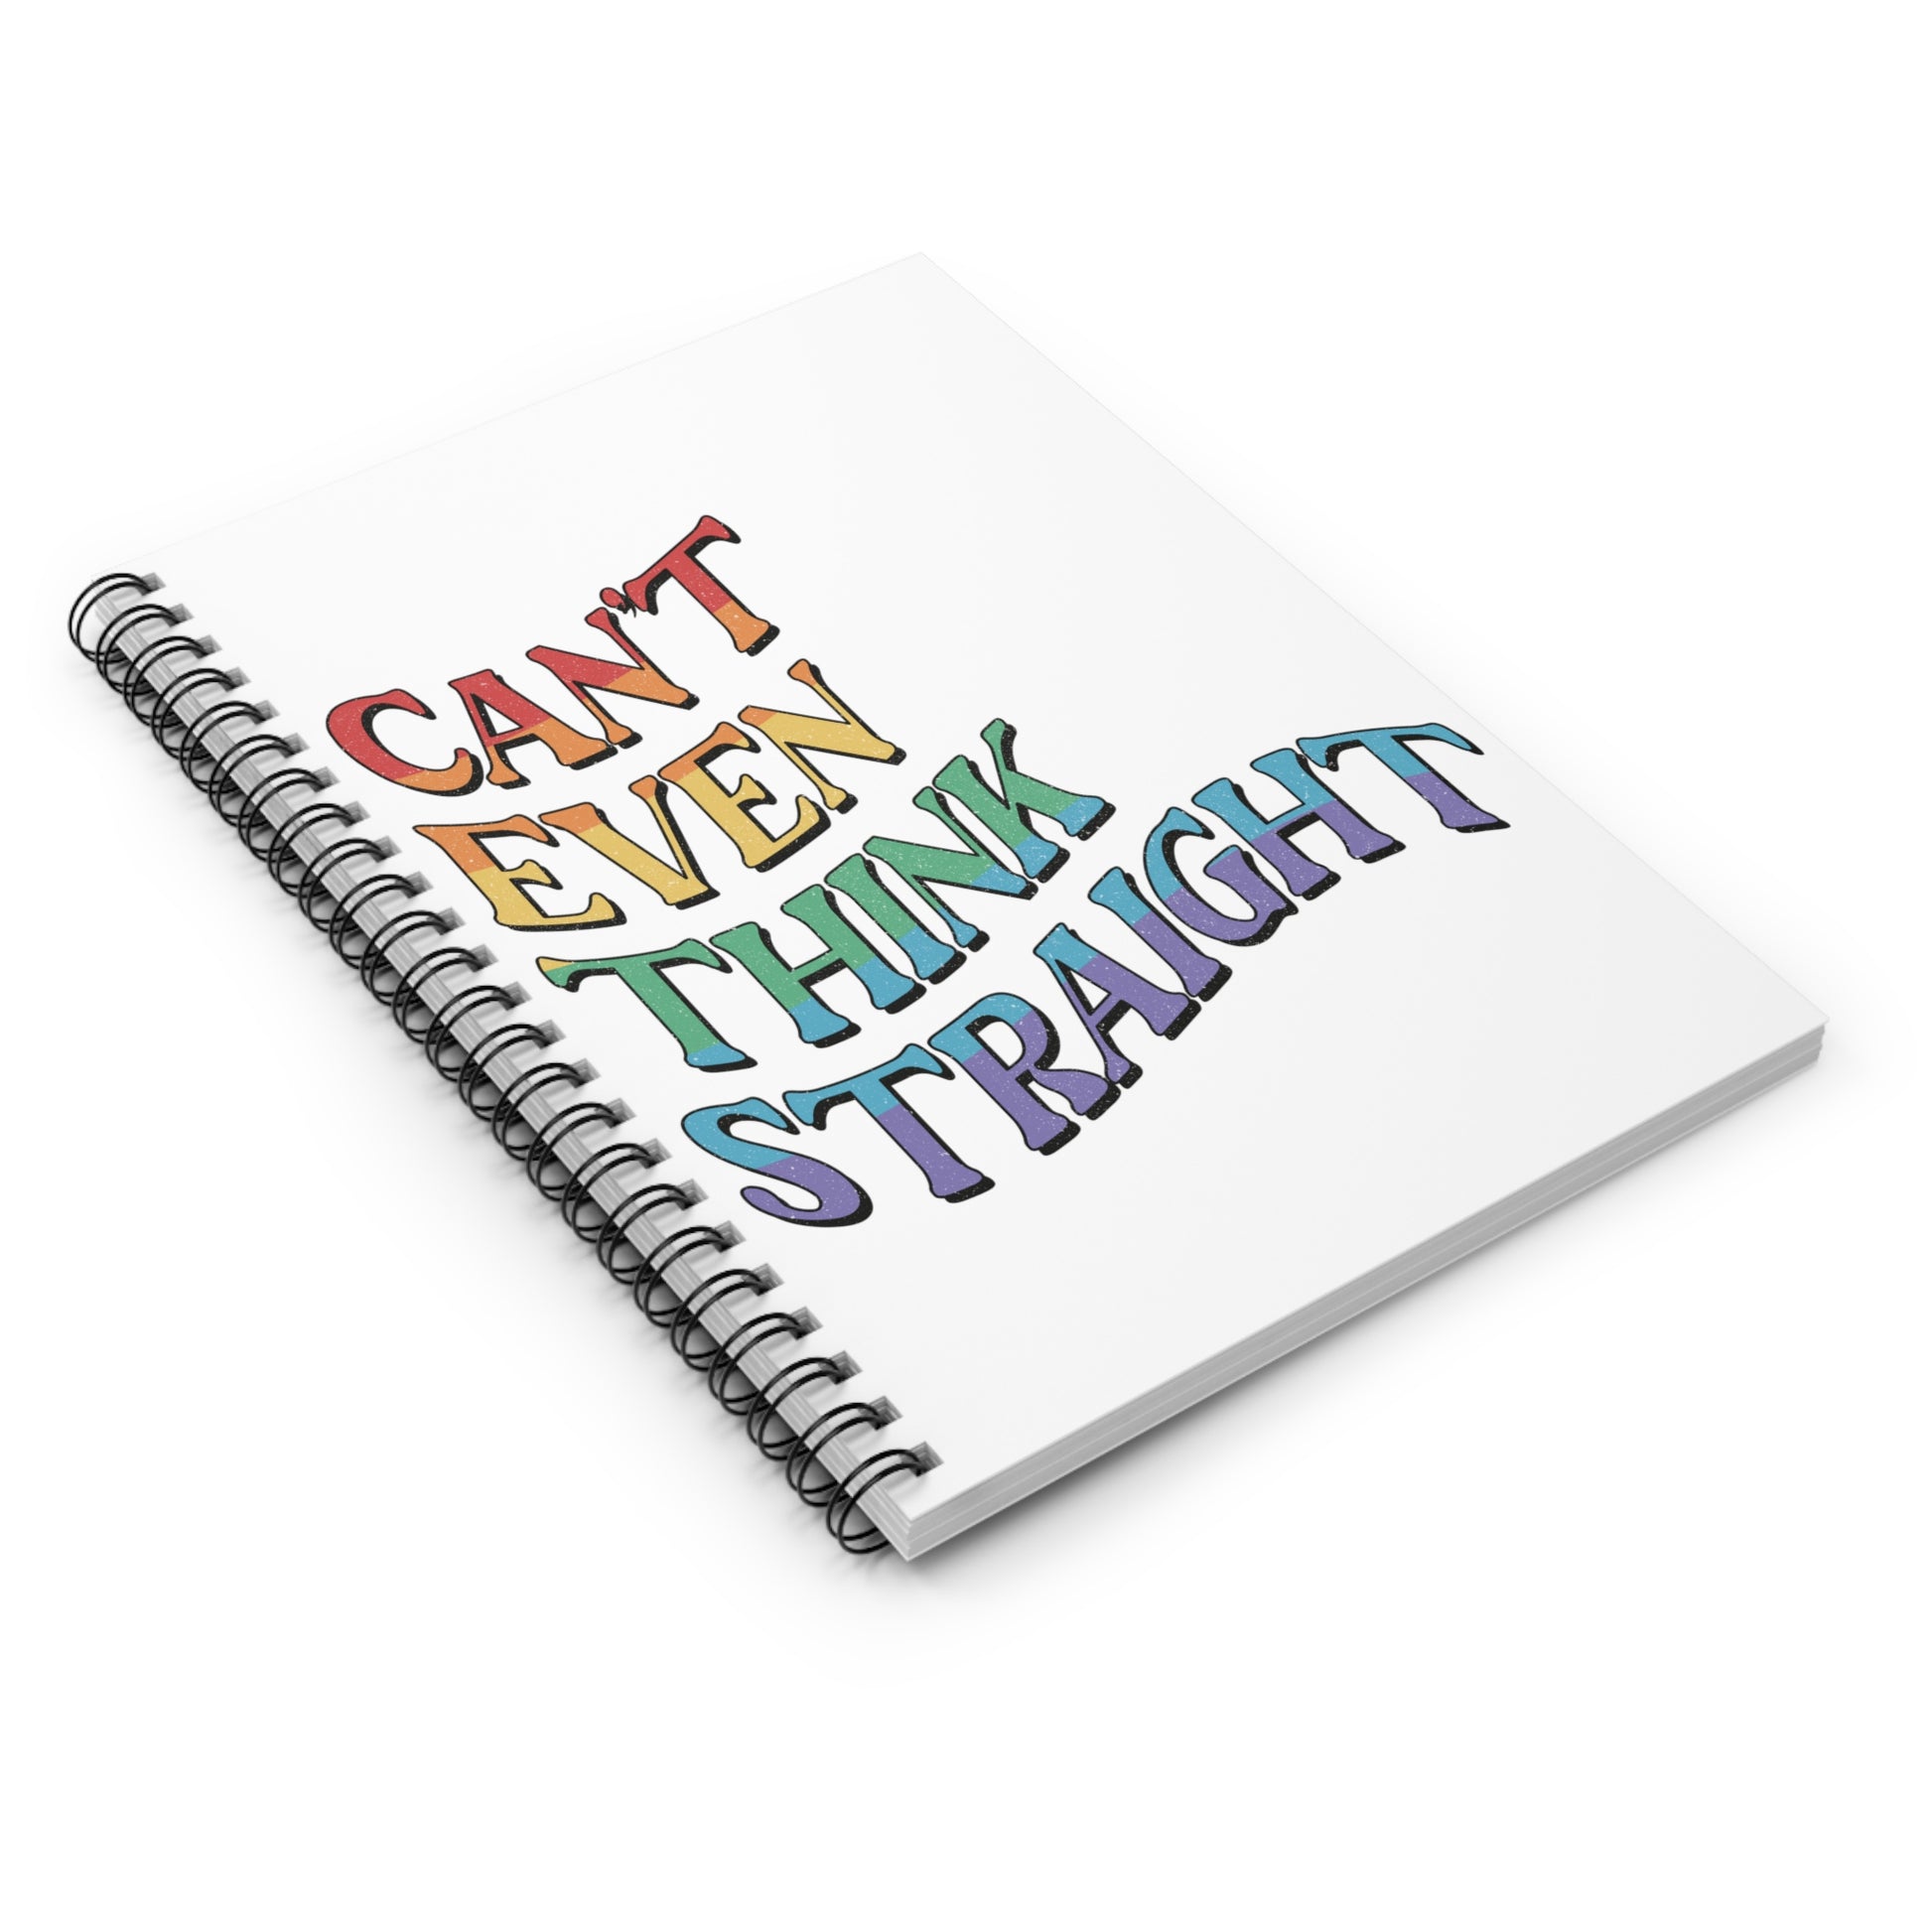 Can't Even Think Straight: Spiral Notebook - Log Books - Journals - Diaries - and More Custom Printed by TheGlassyLass